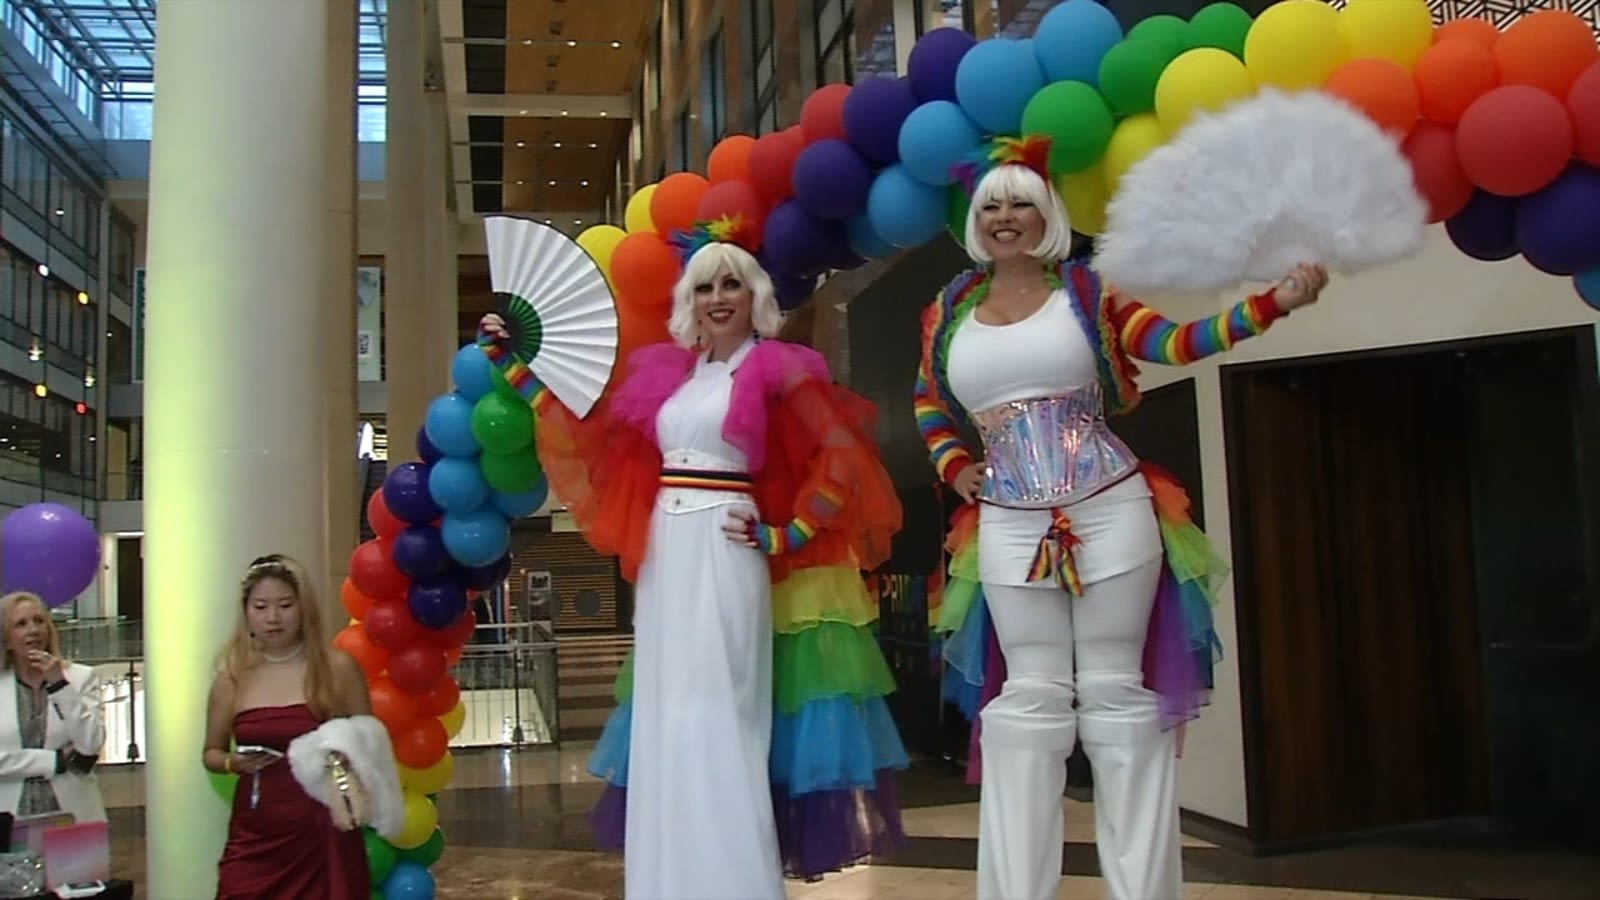 San Francisco's 1st annual Pride Prom celebrates inclusion, helps revitalize downtown